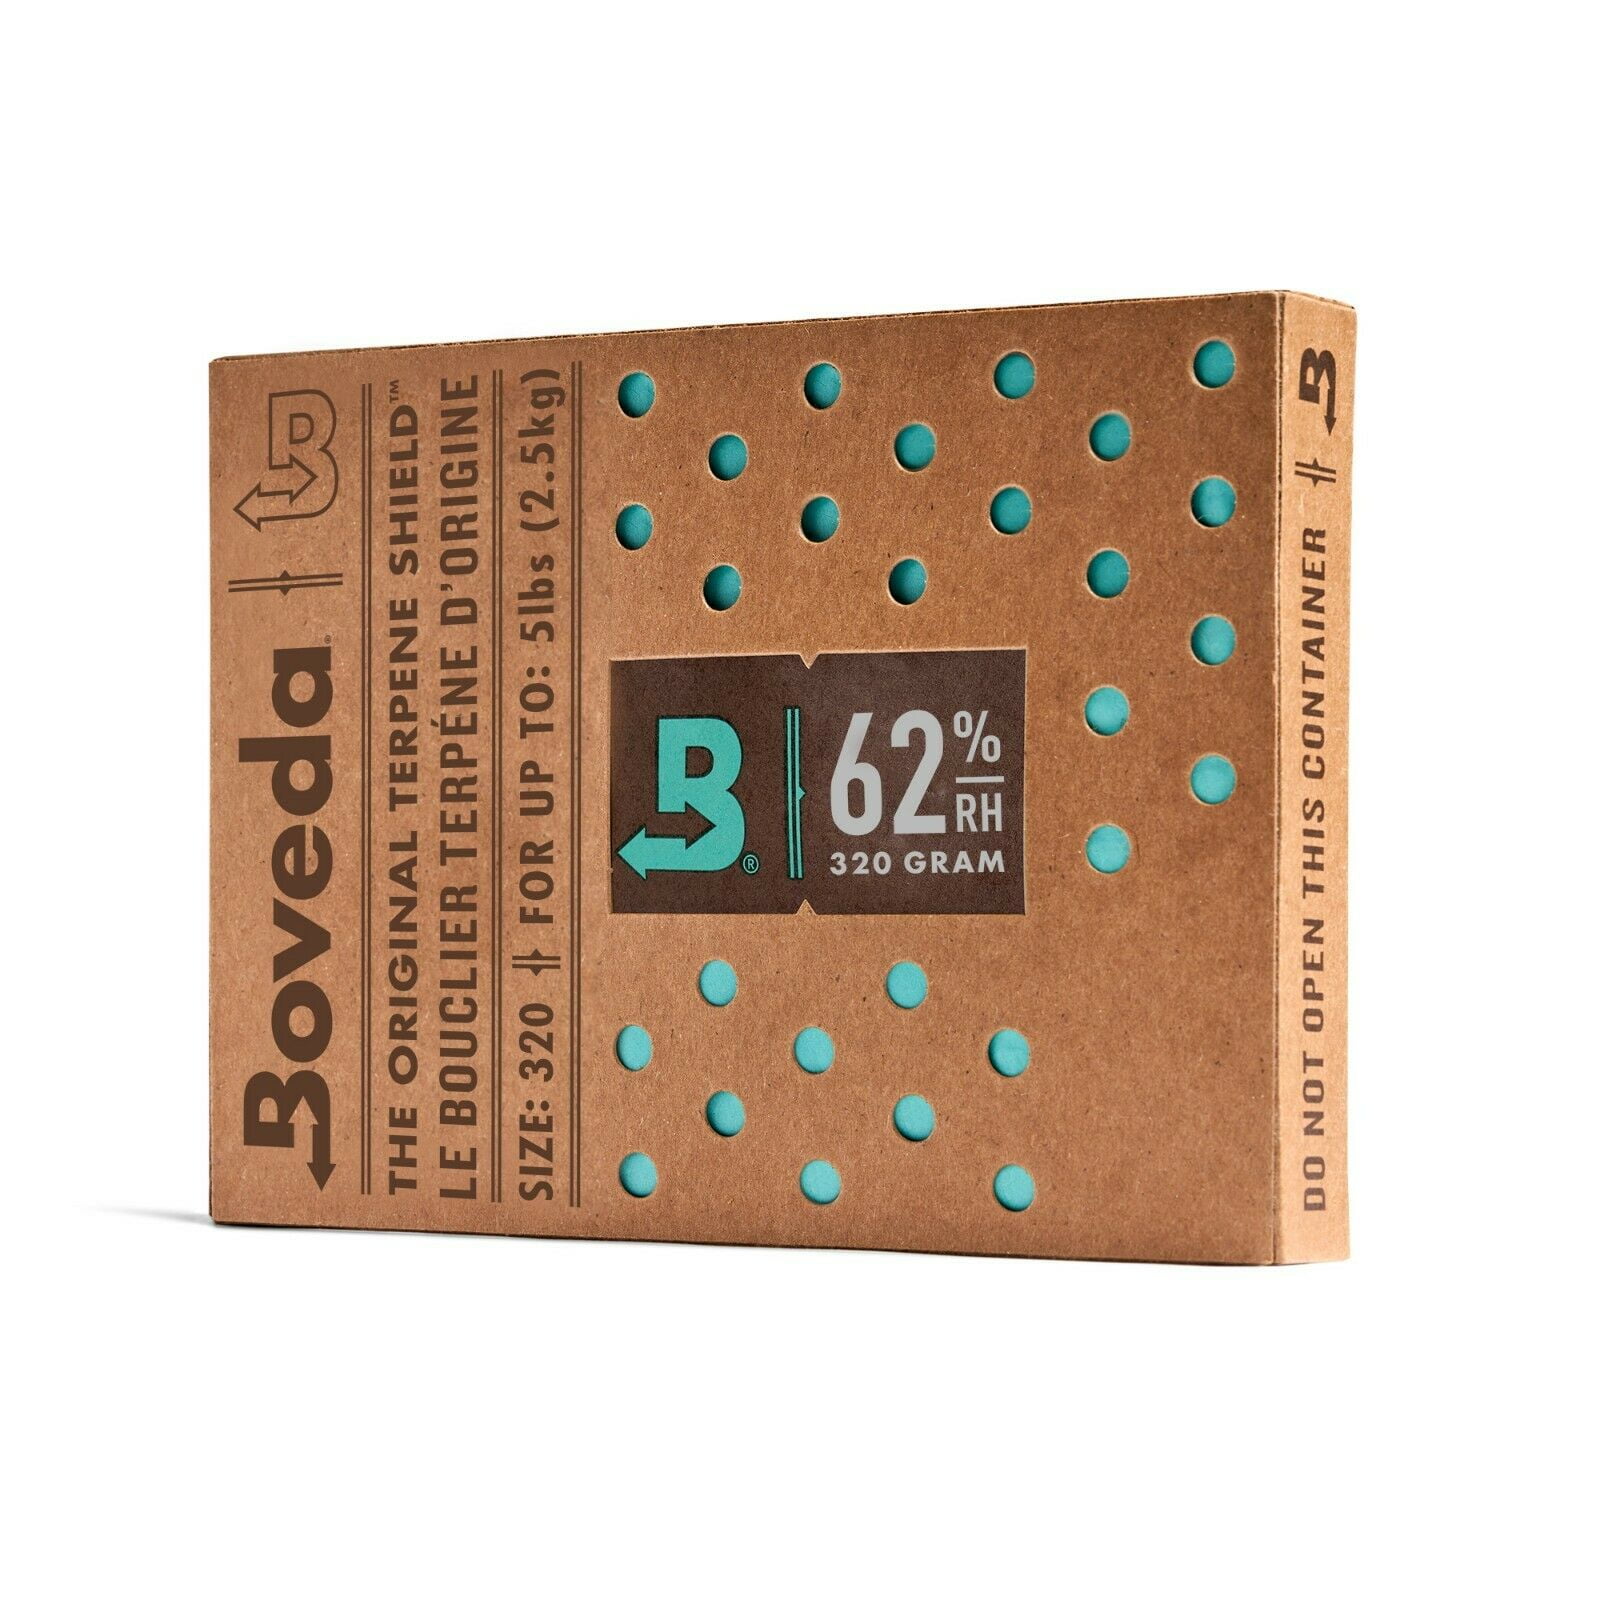 NEW Boveda 84% RH Humidity Control Large 60 Gram Size Individually Wrapped 